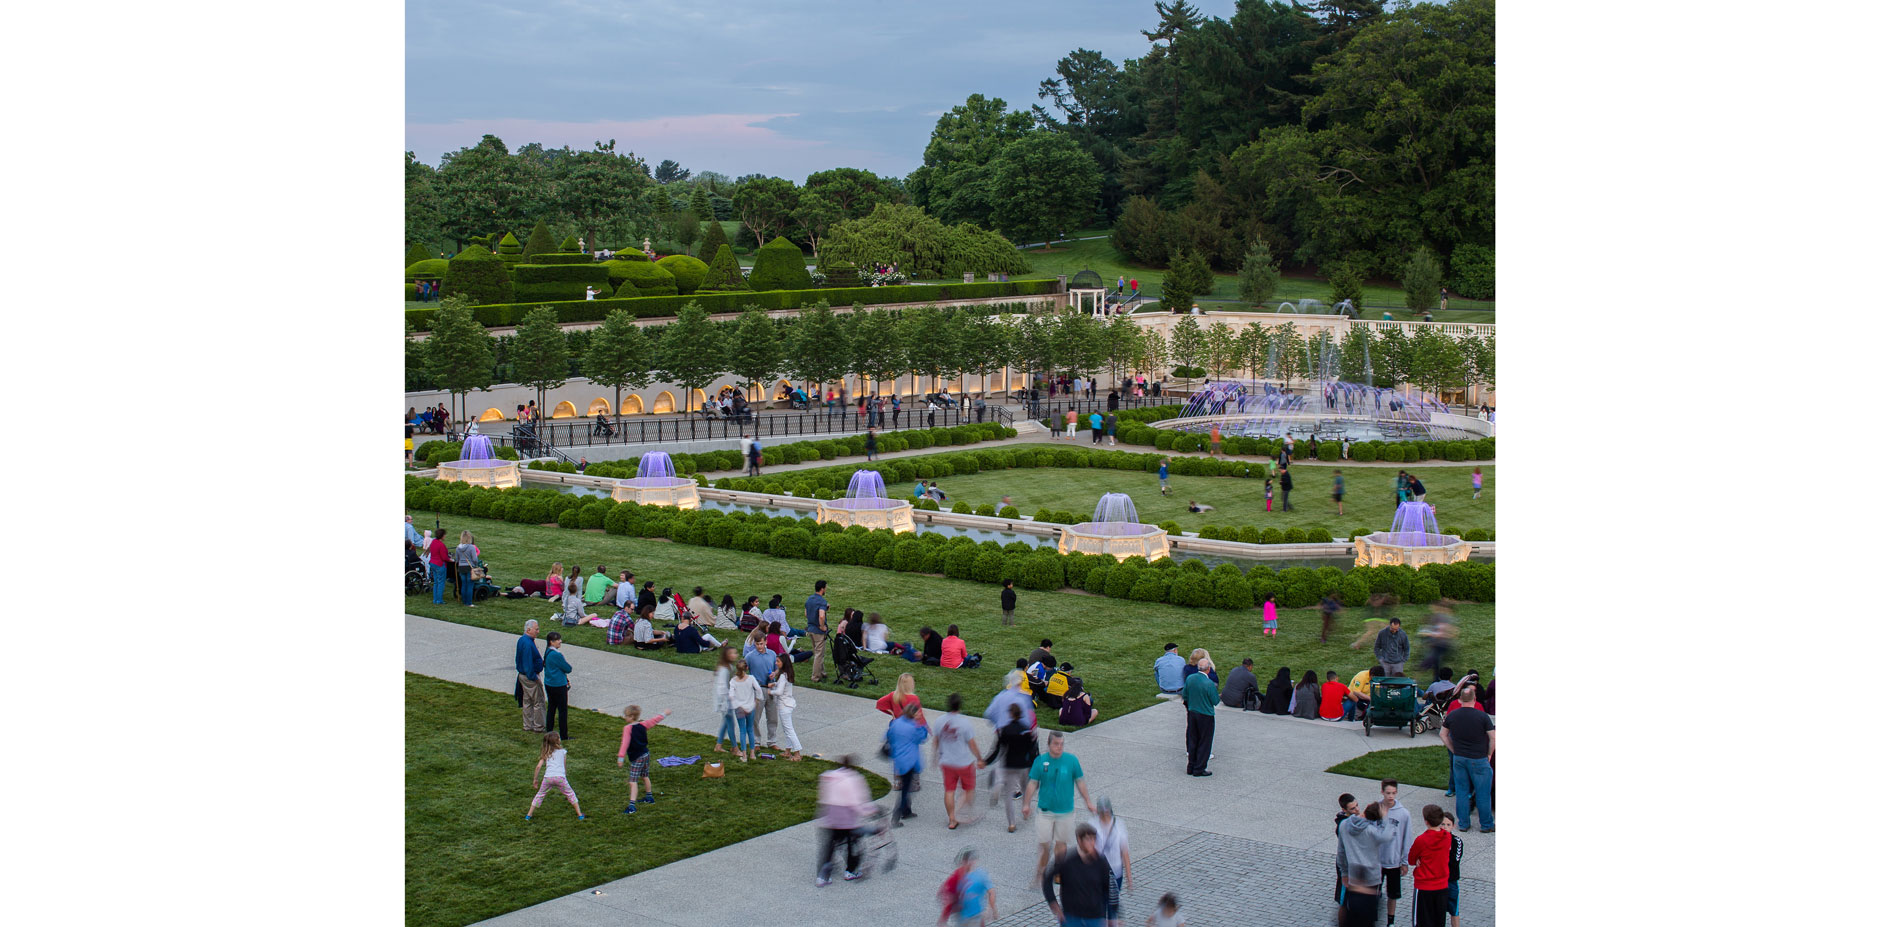 Before the fountain show in the evening, people gather on the lawn to get a good view.…